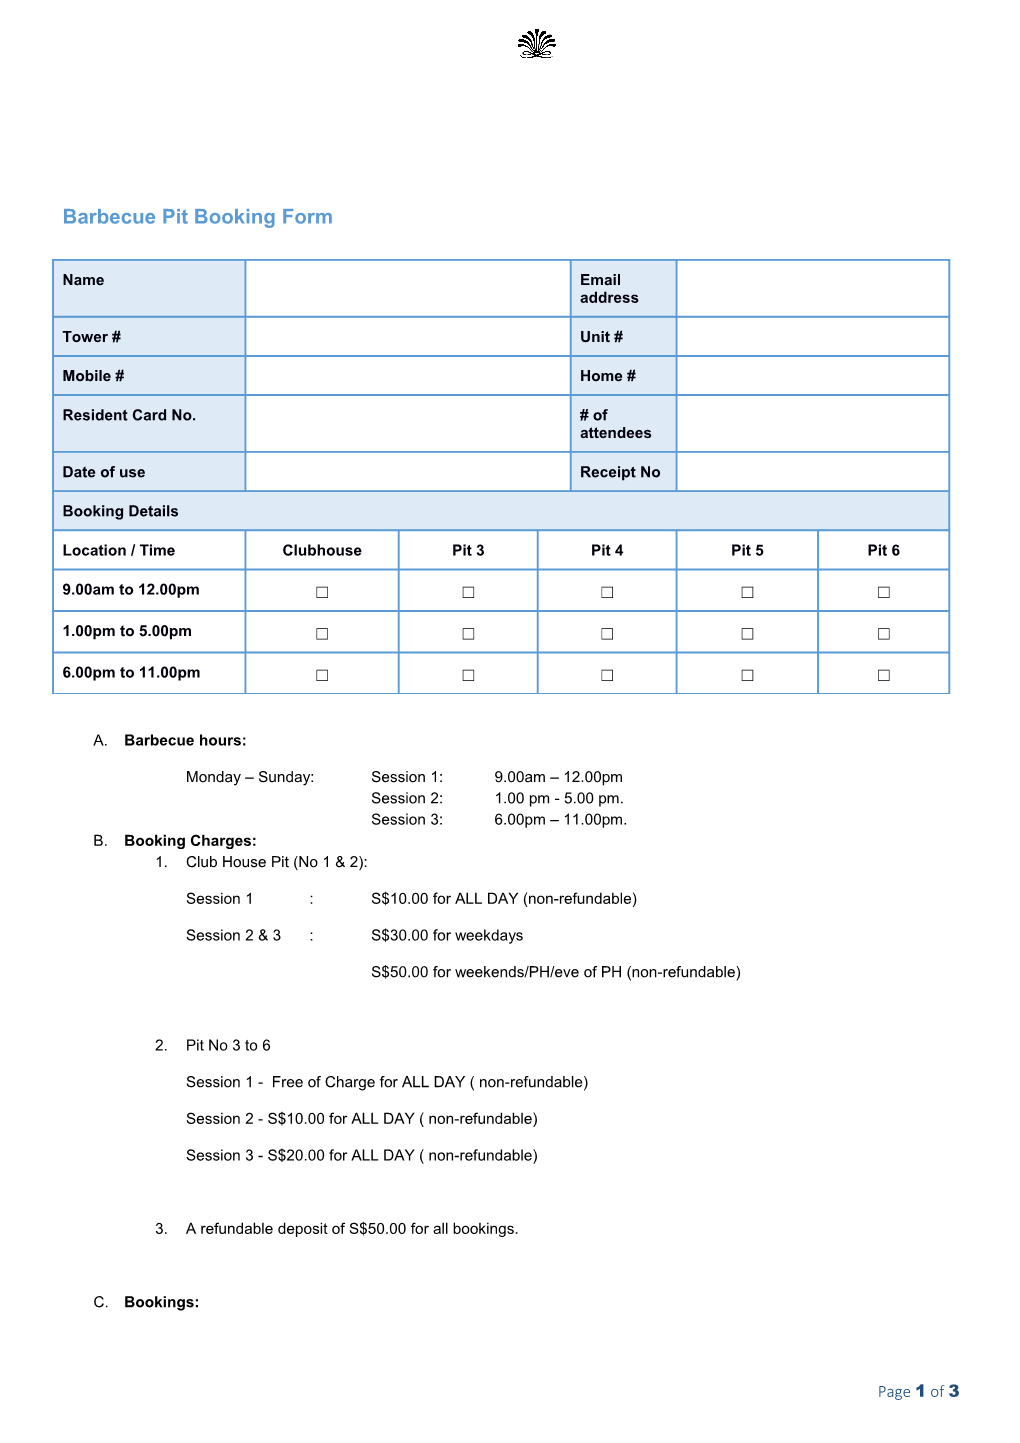 Barbecue Pit Booking Form